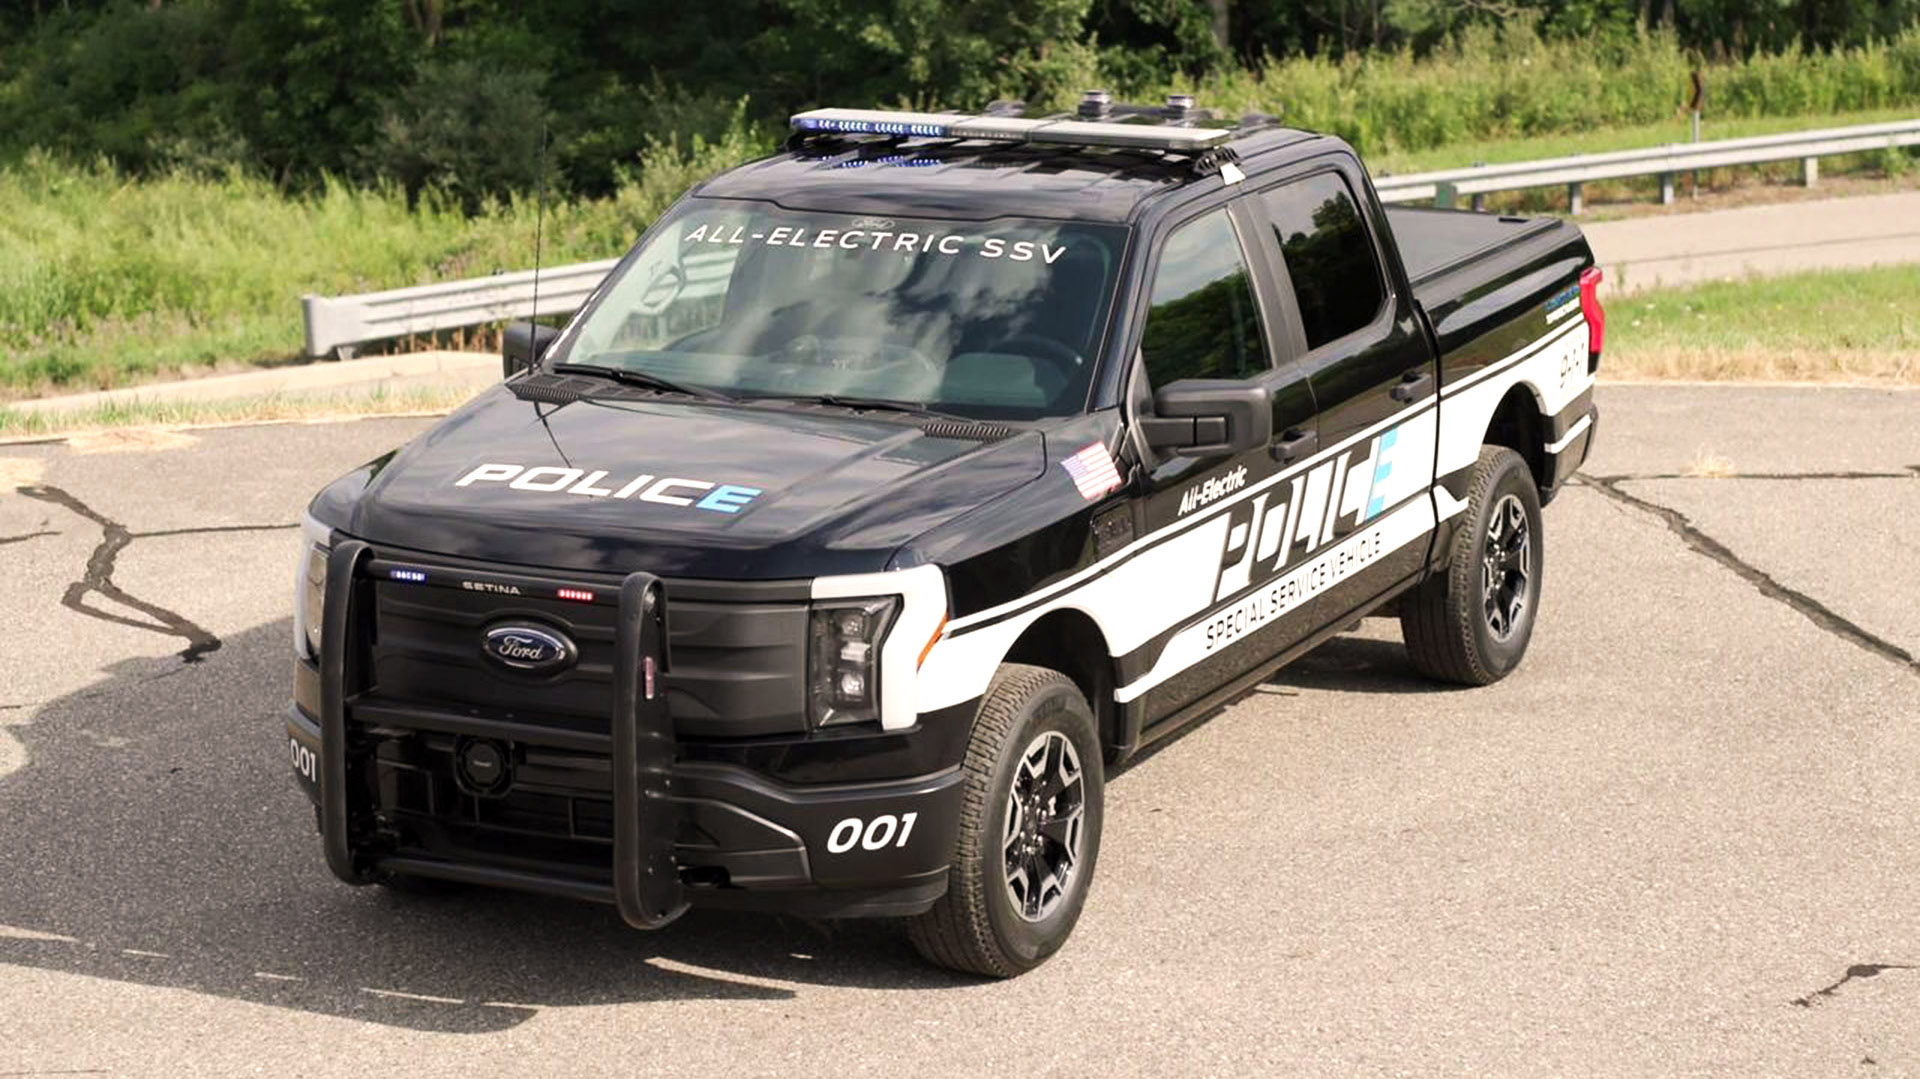 The Ford F-150 Lightning Pro SSV will be America's fastest, most powerful police vehicle.